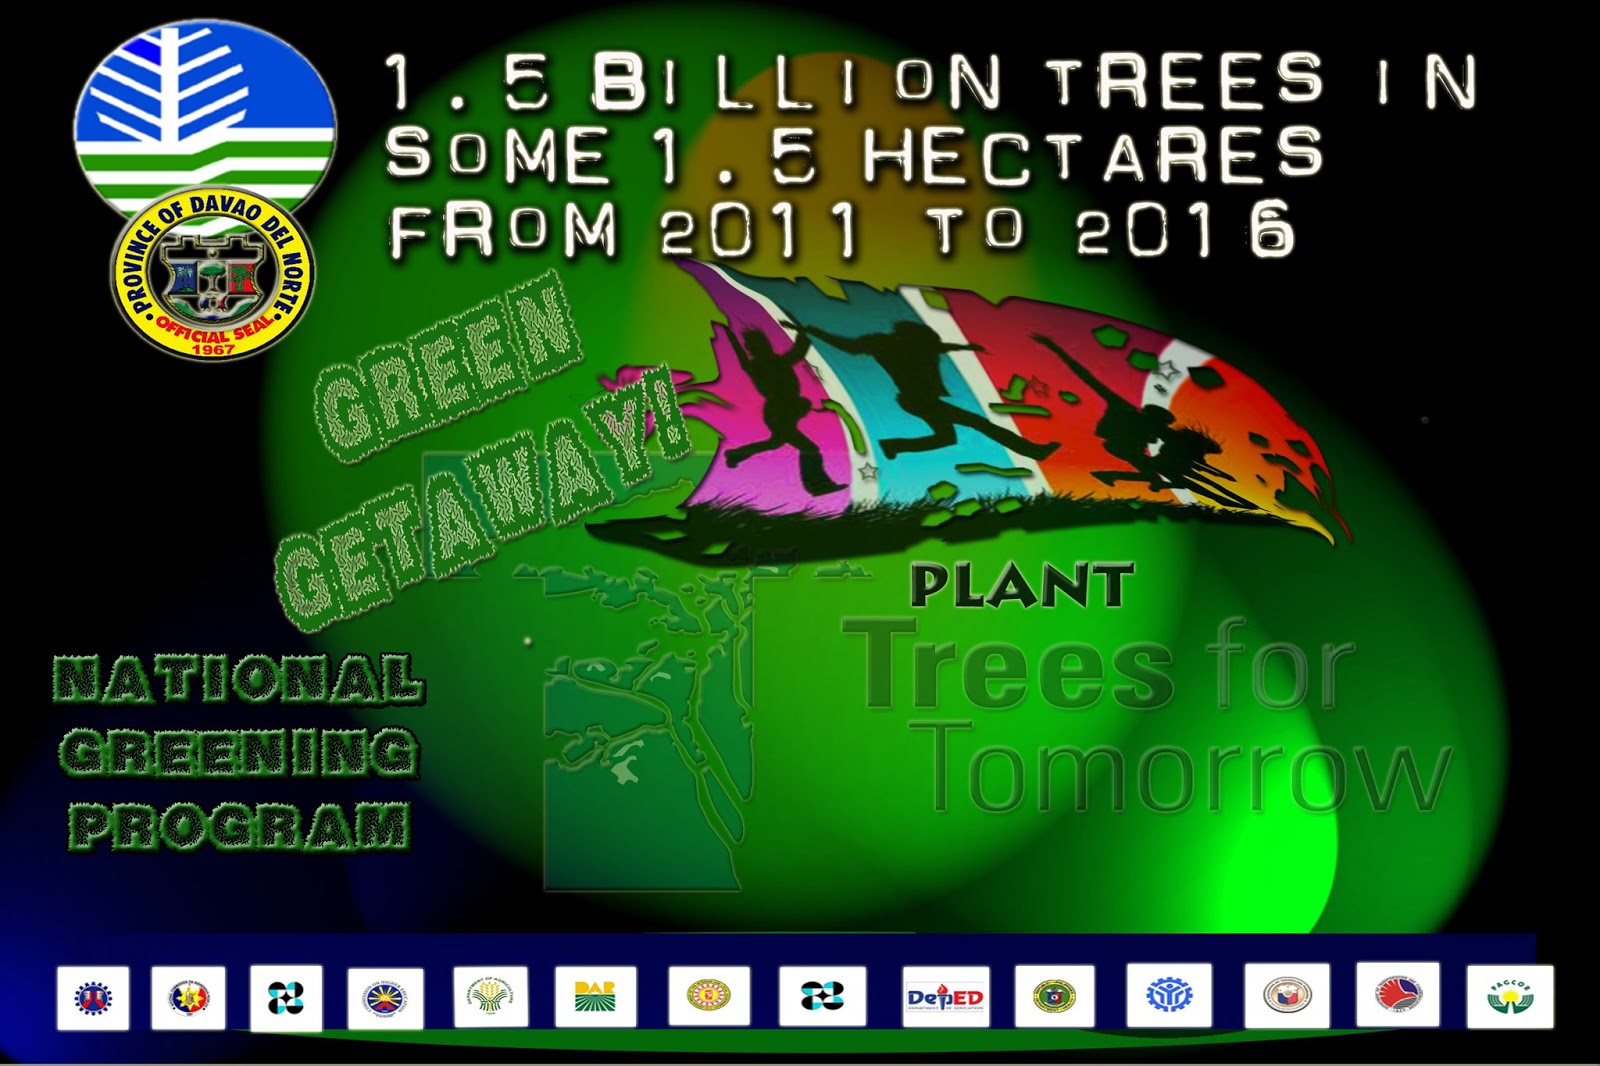 Thoughts to Promote Positive Action...: National Greening Program